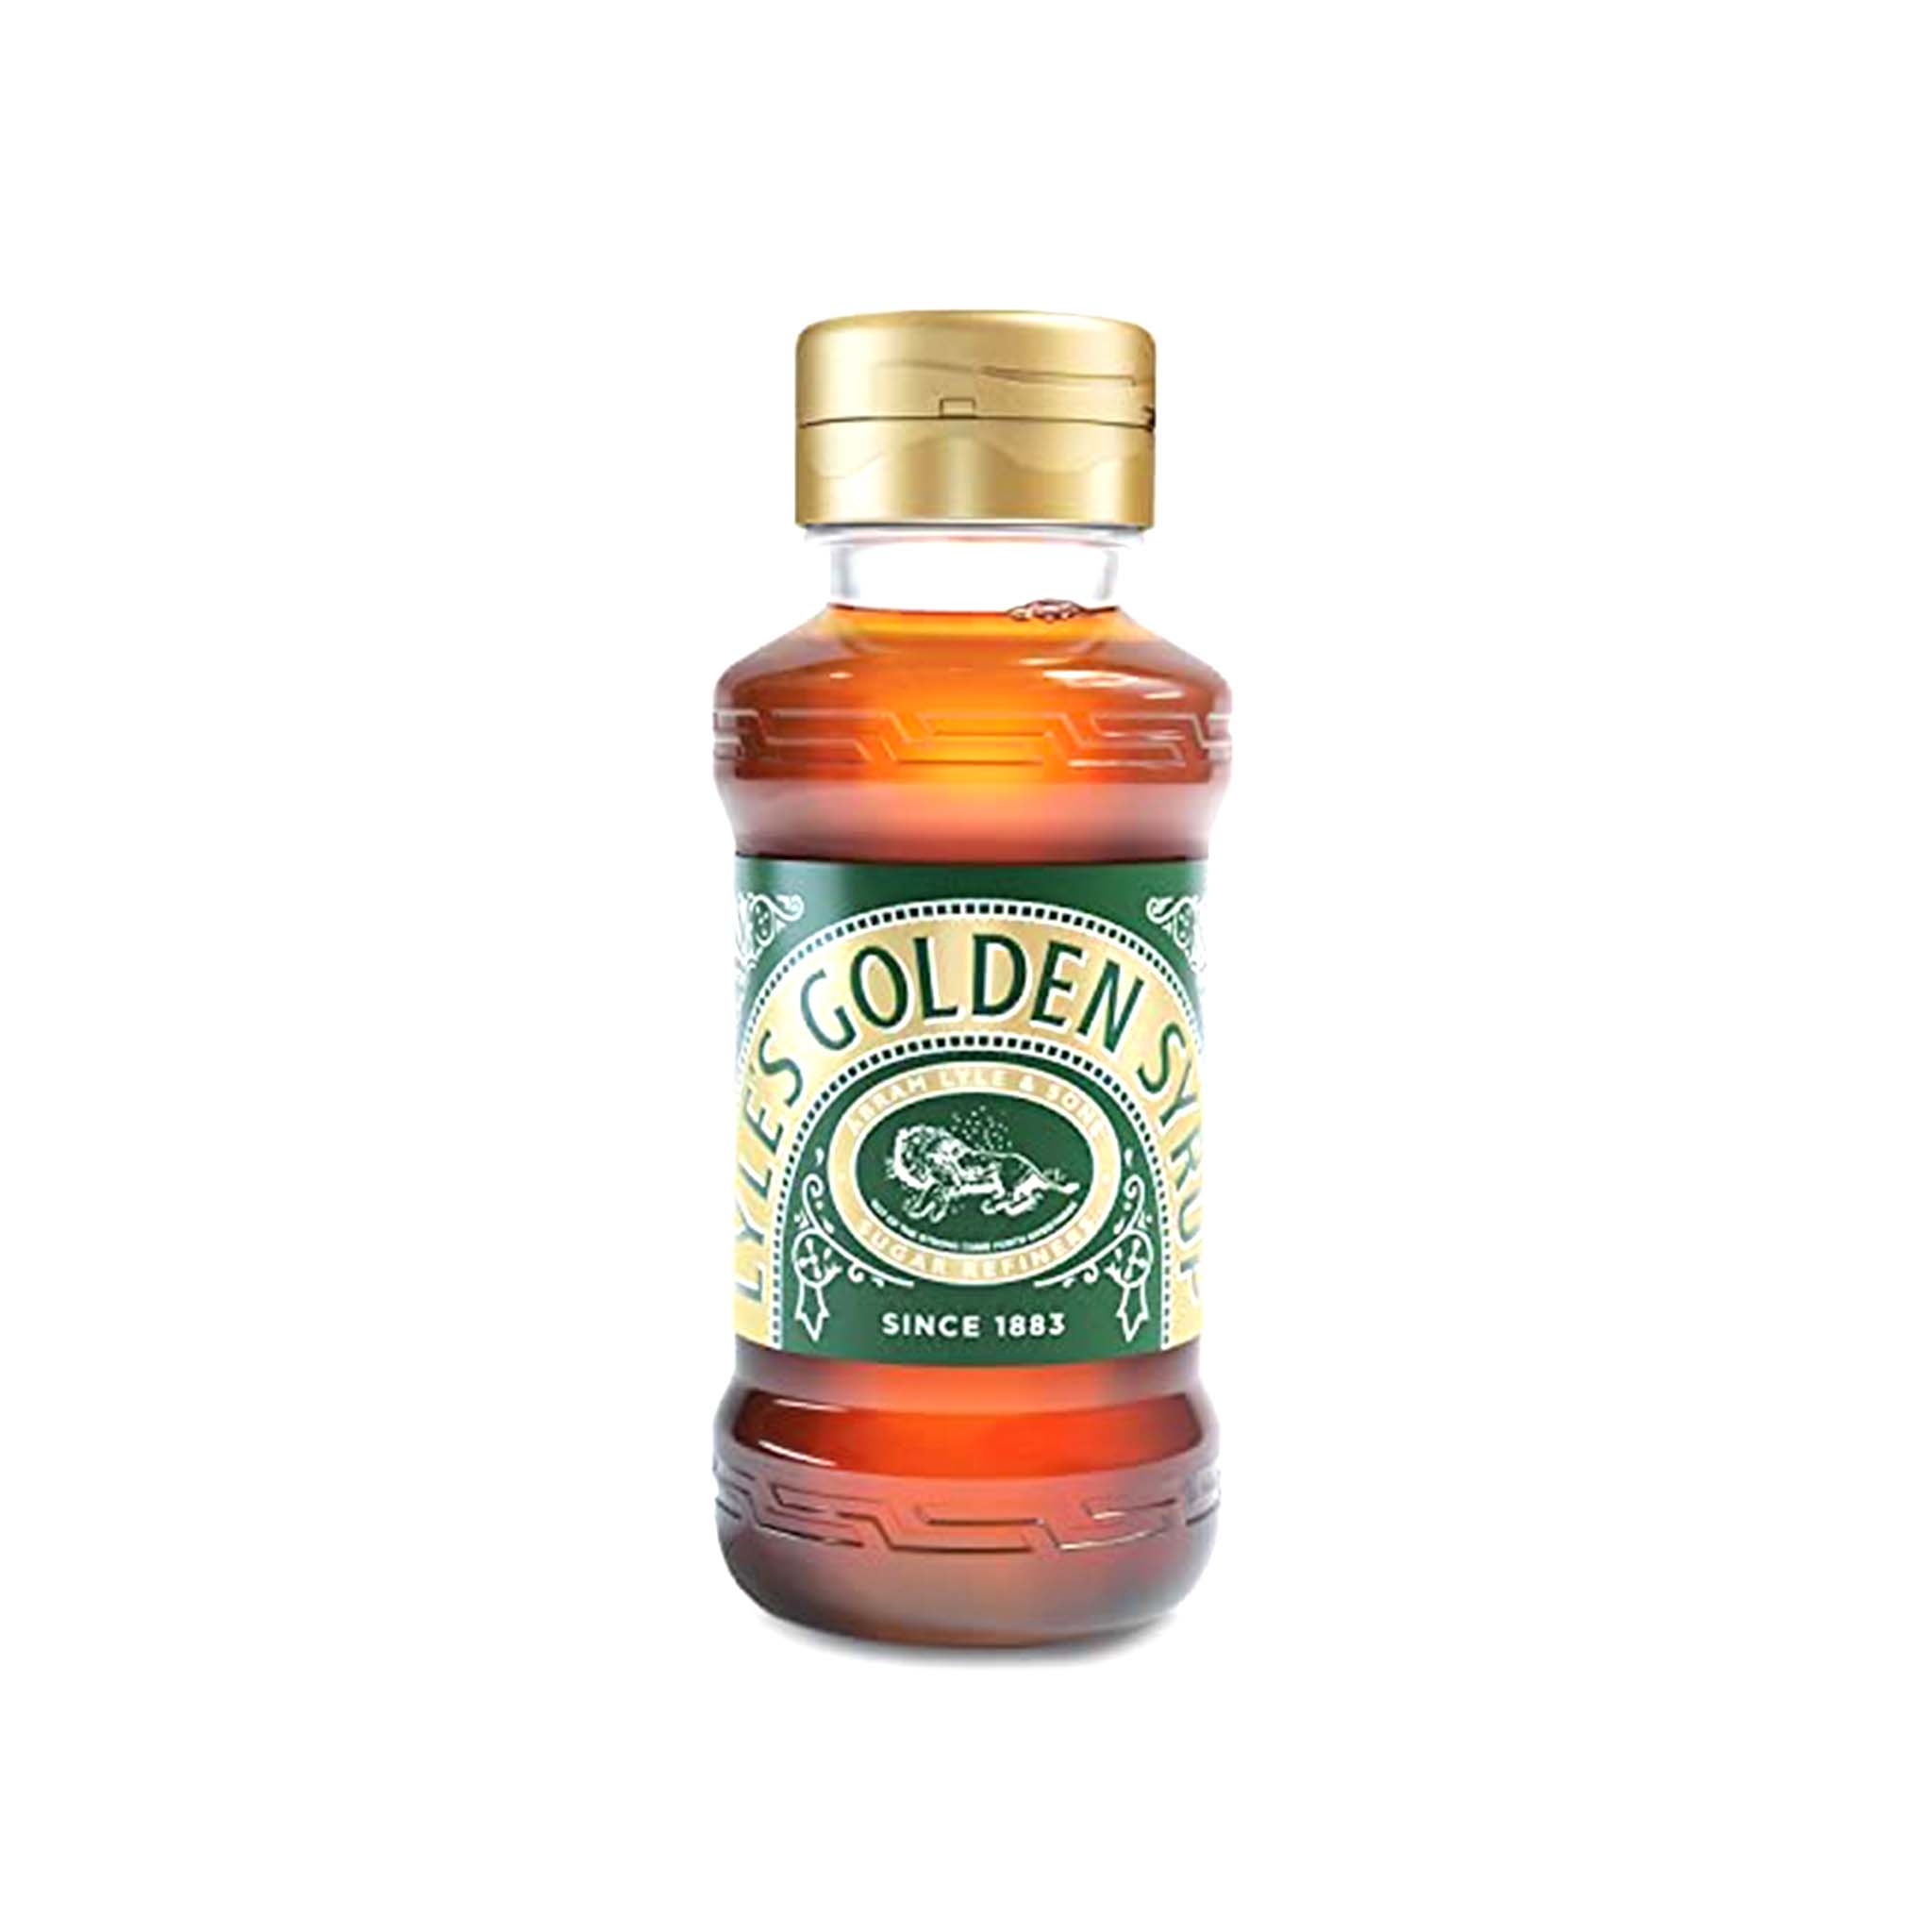 LYLES GOLDEN SYRUP SQUEEZE BOTTLE 325g